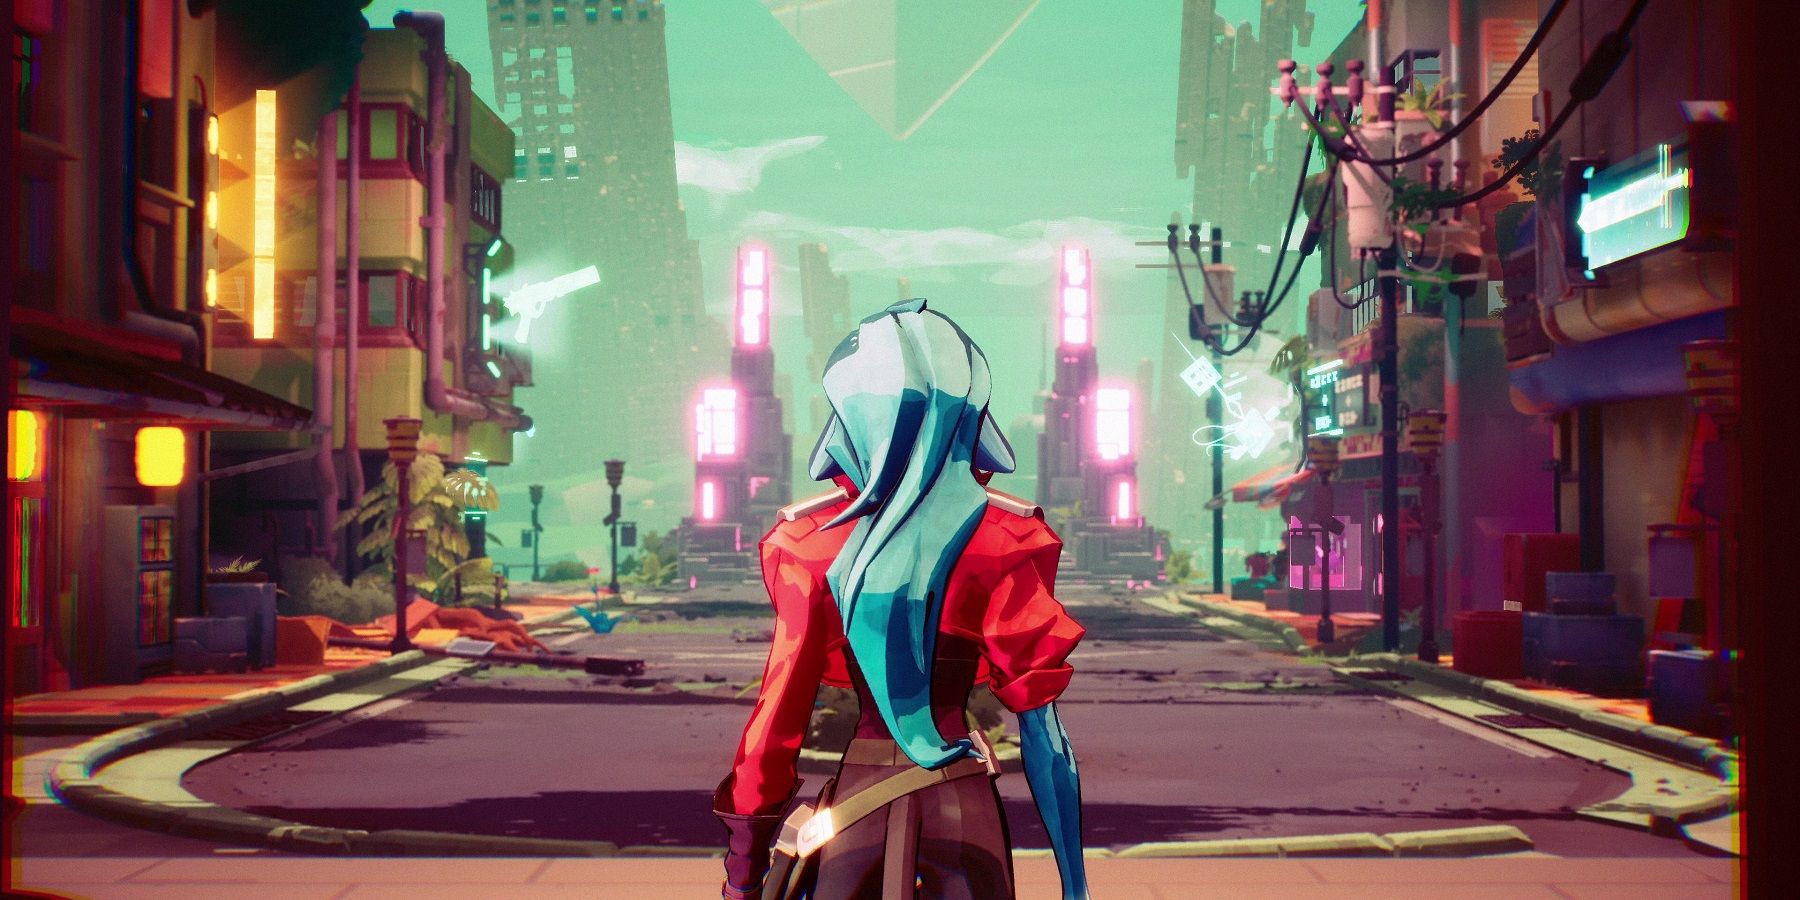 A character from Hyper Light Drifter with long blue hair, shown walking down a street from behind.